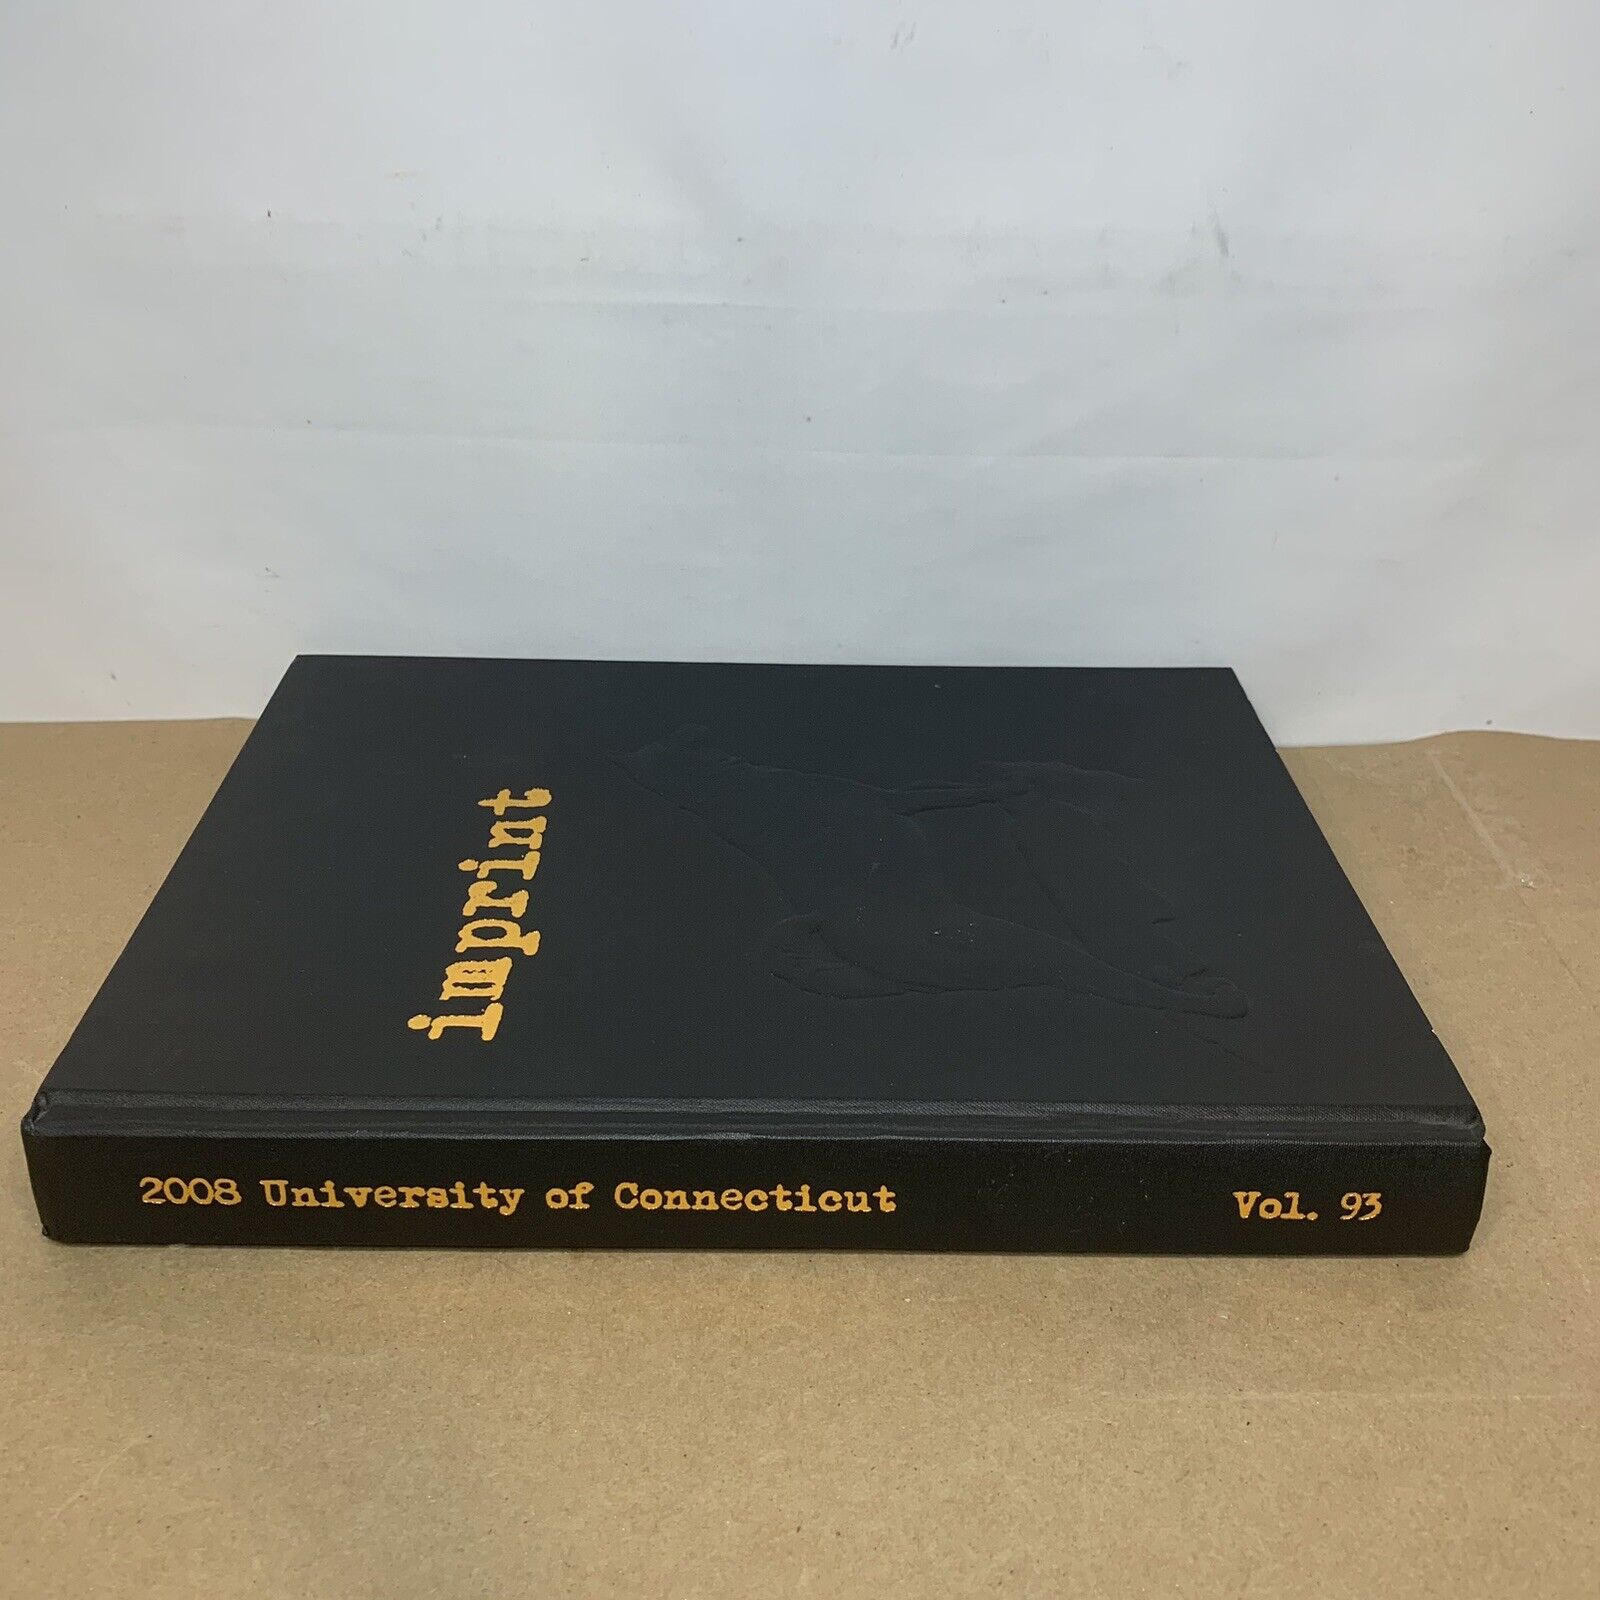 2008 University of Connecticut UCONN Yearbook Volume 93